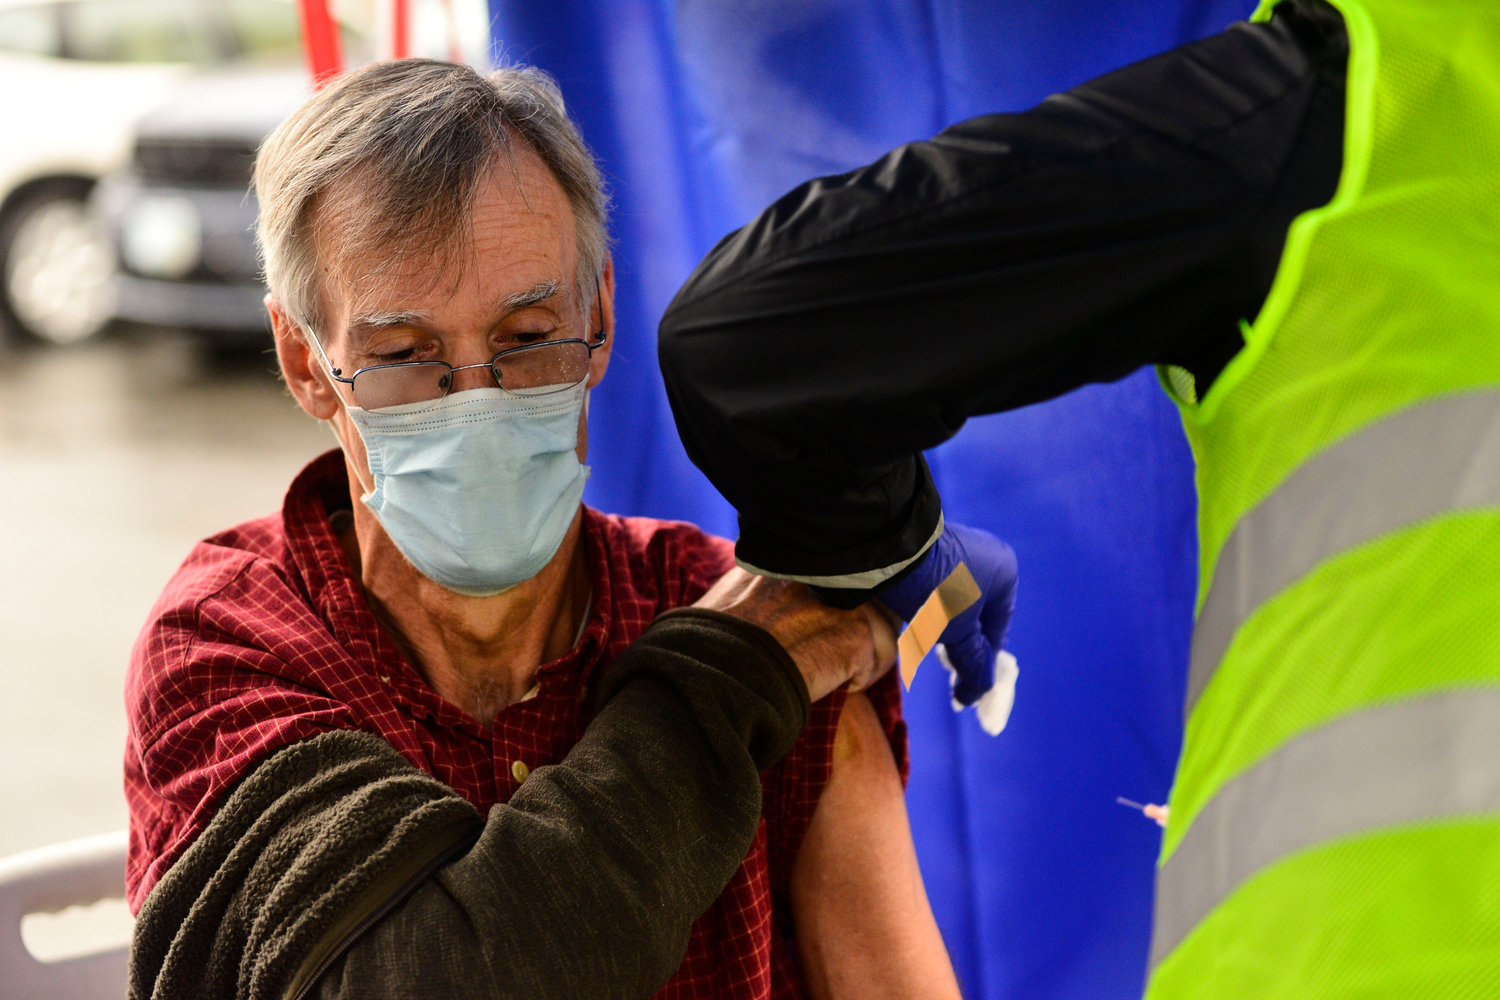 FILE - Crager Boardman, from Brattleboro, Vt., receives a shot at a flu vaccine clinic in Brattleboro on Tuesday, Oct. 26, 2021. On Wednesday, June 22, 2022, a federal advisory panel says Americans 65 and older should get newer, souped-up flu vaccines. The panel unanimously recommended certain flu vaccines for seniors, whose weakened immune systems don‚Äôt respond as well to traditional shots. (Kristopher Radder/The Brattleboro Reformer via AP, File)